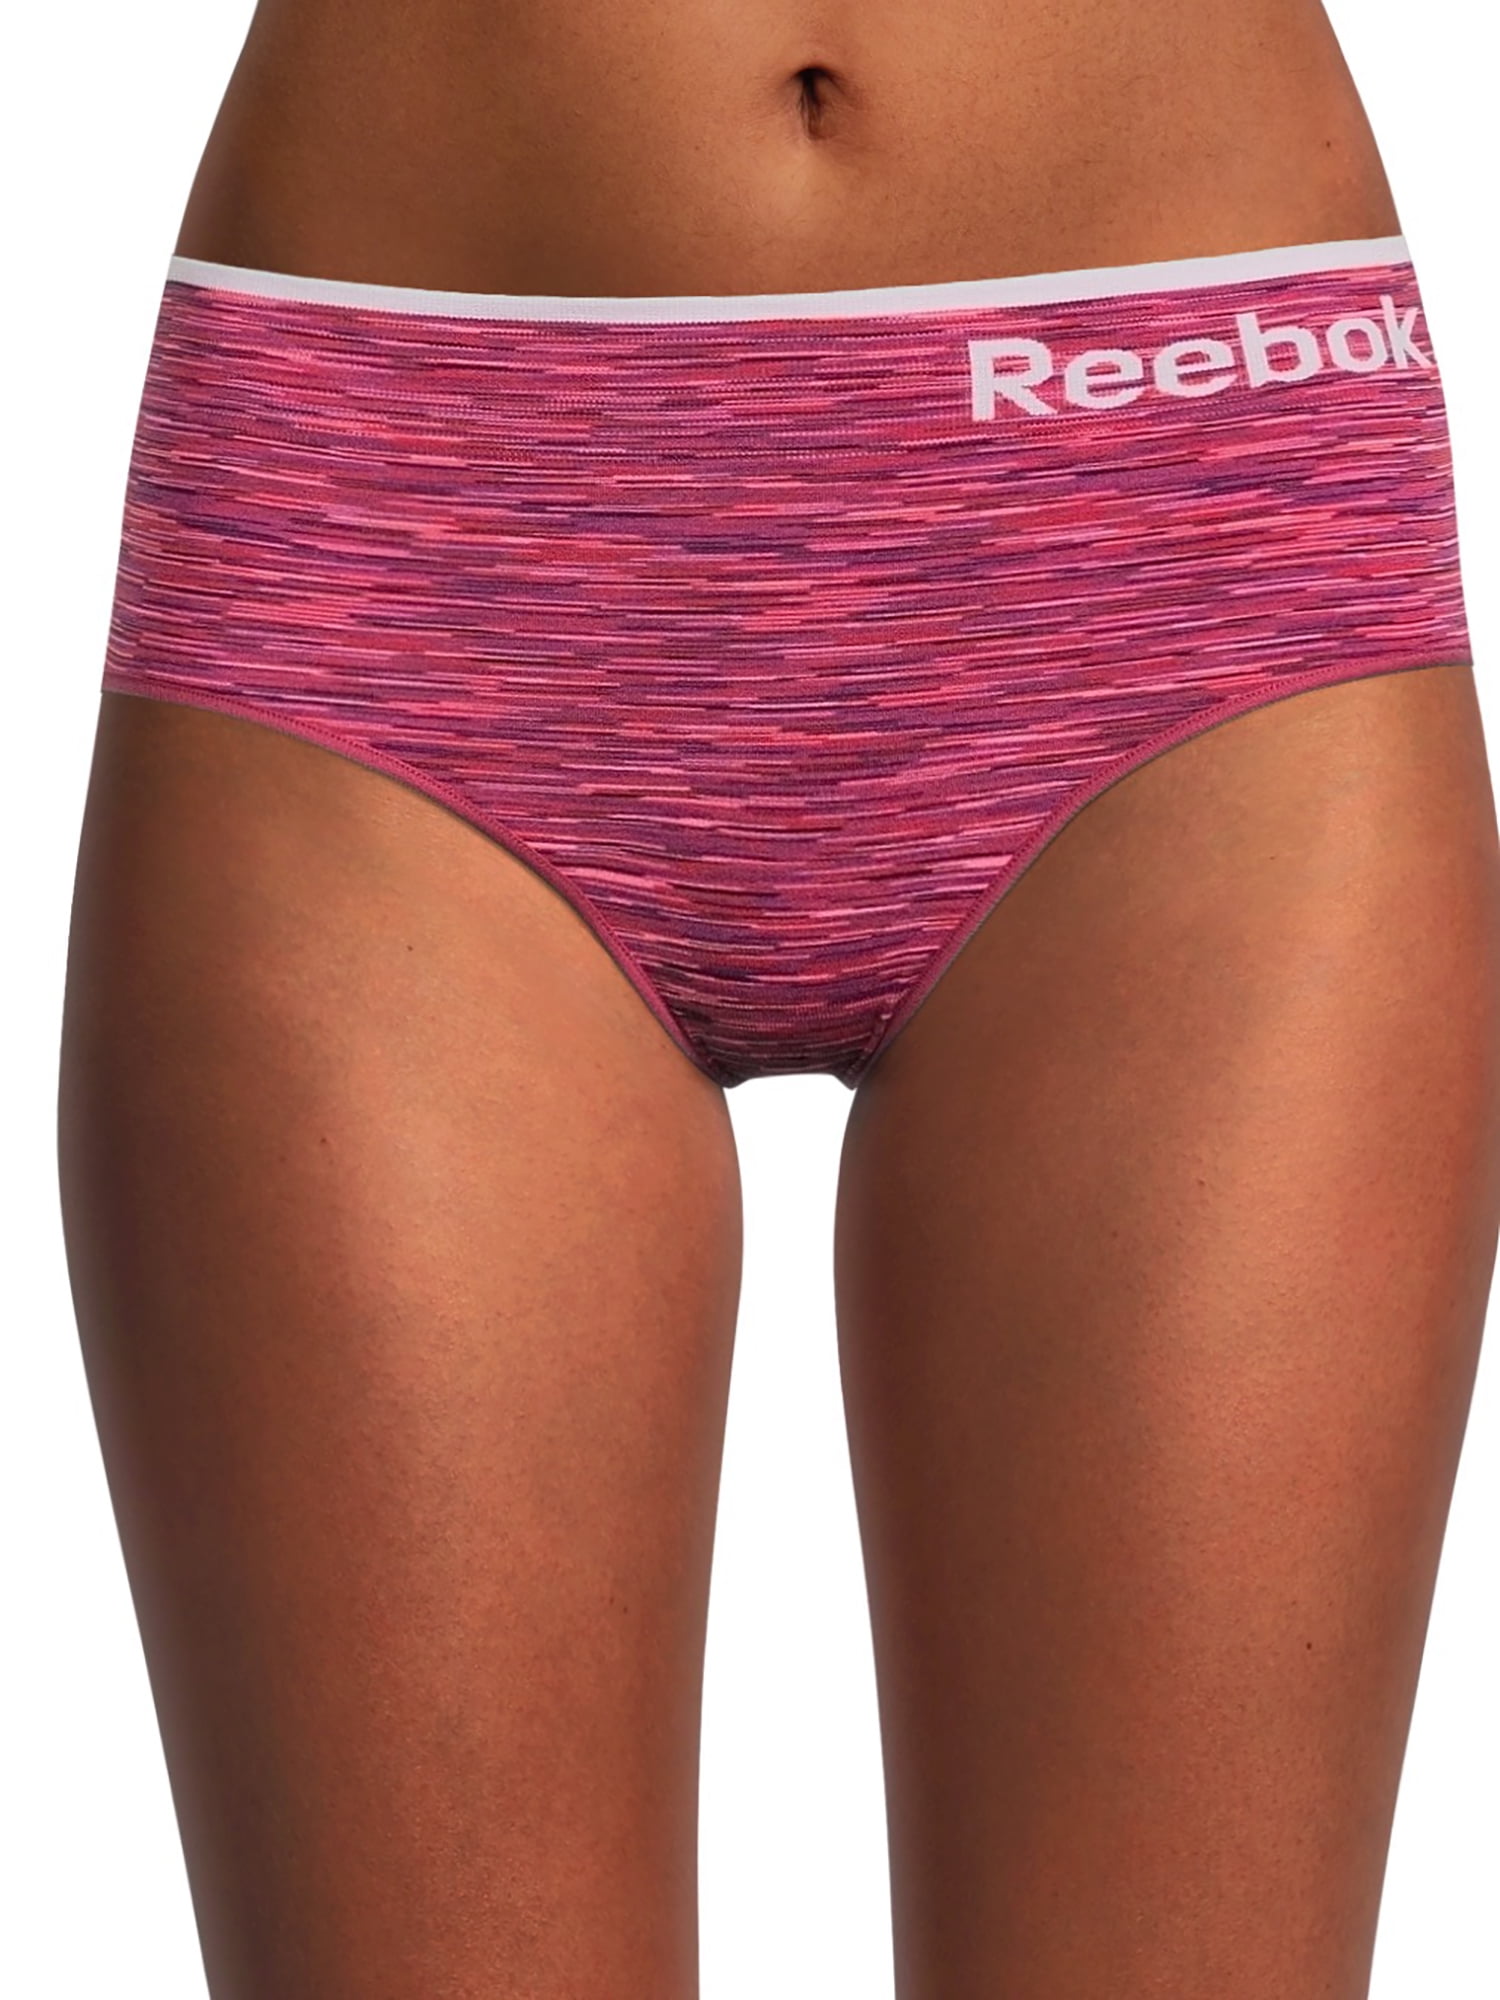 Retrobird Loose Fit Underwear Petrol Color Non-wired Women's Lace Set